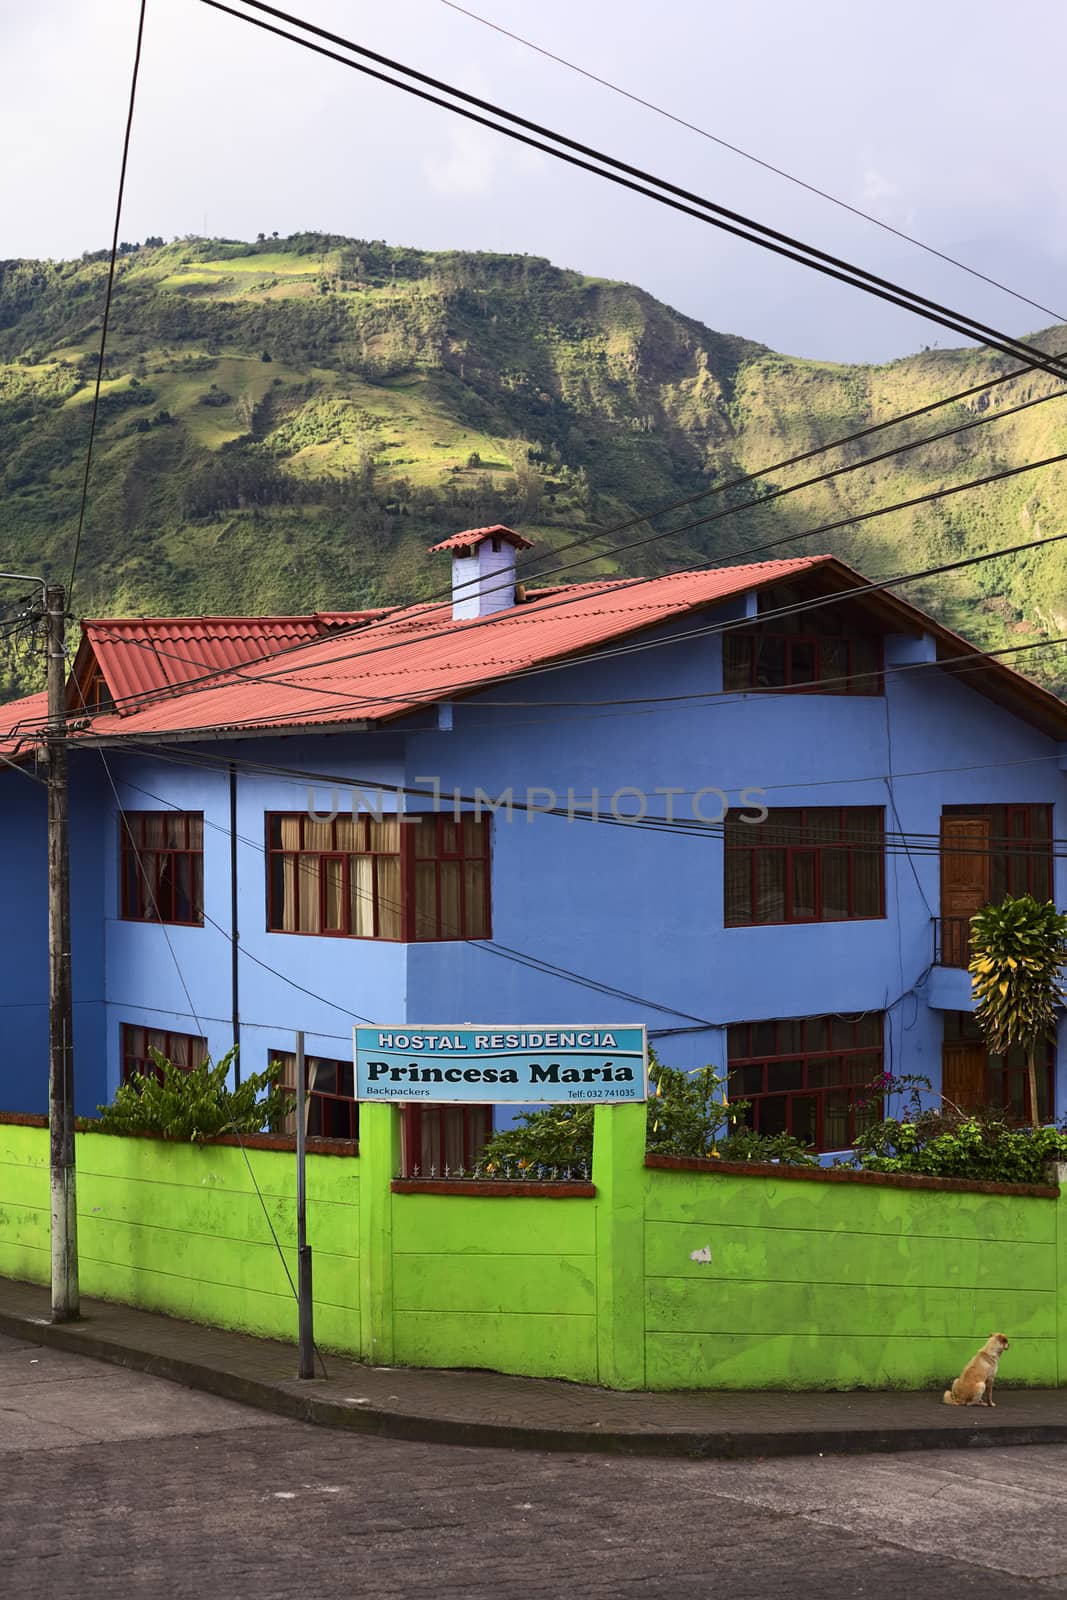 BANOS, ECUADOR - AUGUST 1, 2014: Hostal Residencia Princesa Maria at the corner of Vicente Rocafuerte and Juan Leon Mera streets on August 1, 2014 in Banos, Ecuador. Banos is a small touristy town in Central Ecuador with many hostels. 